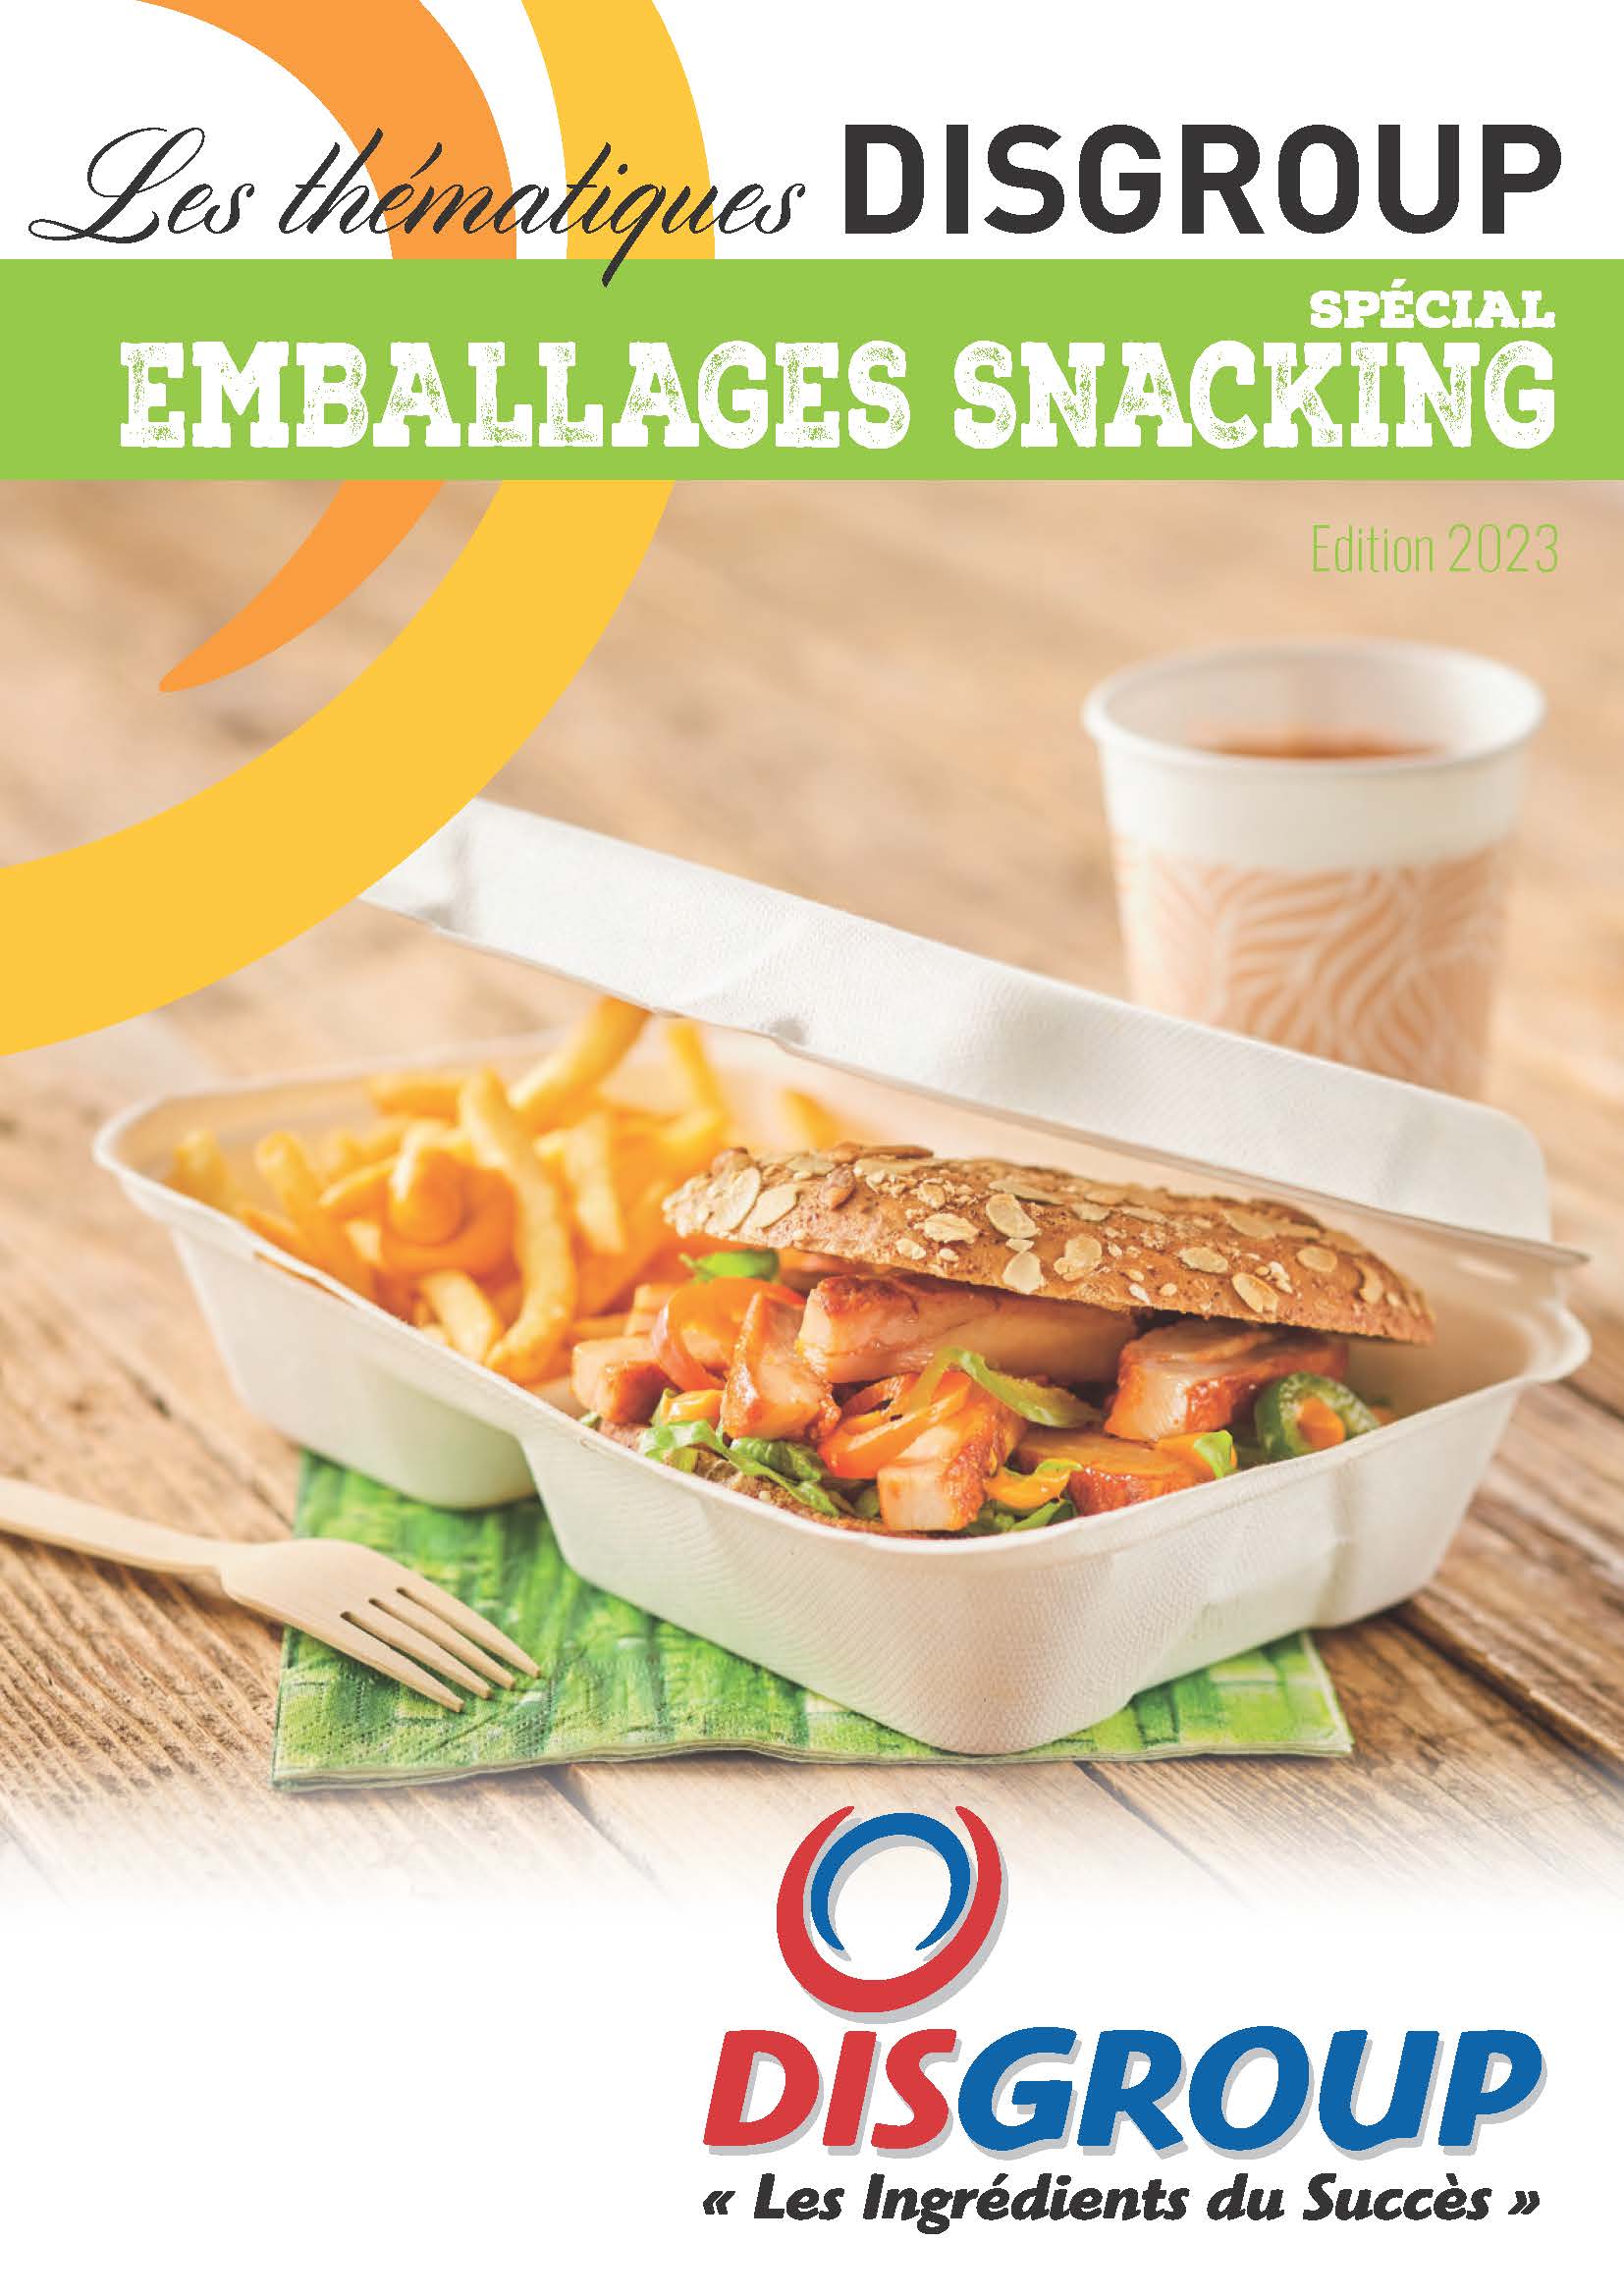 Catalogue thematique special EMBALLAGES SNACKING 2023